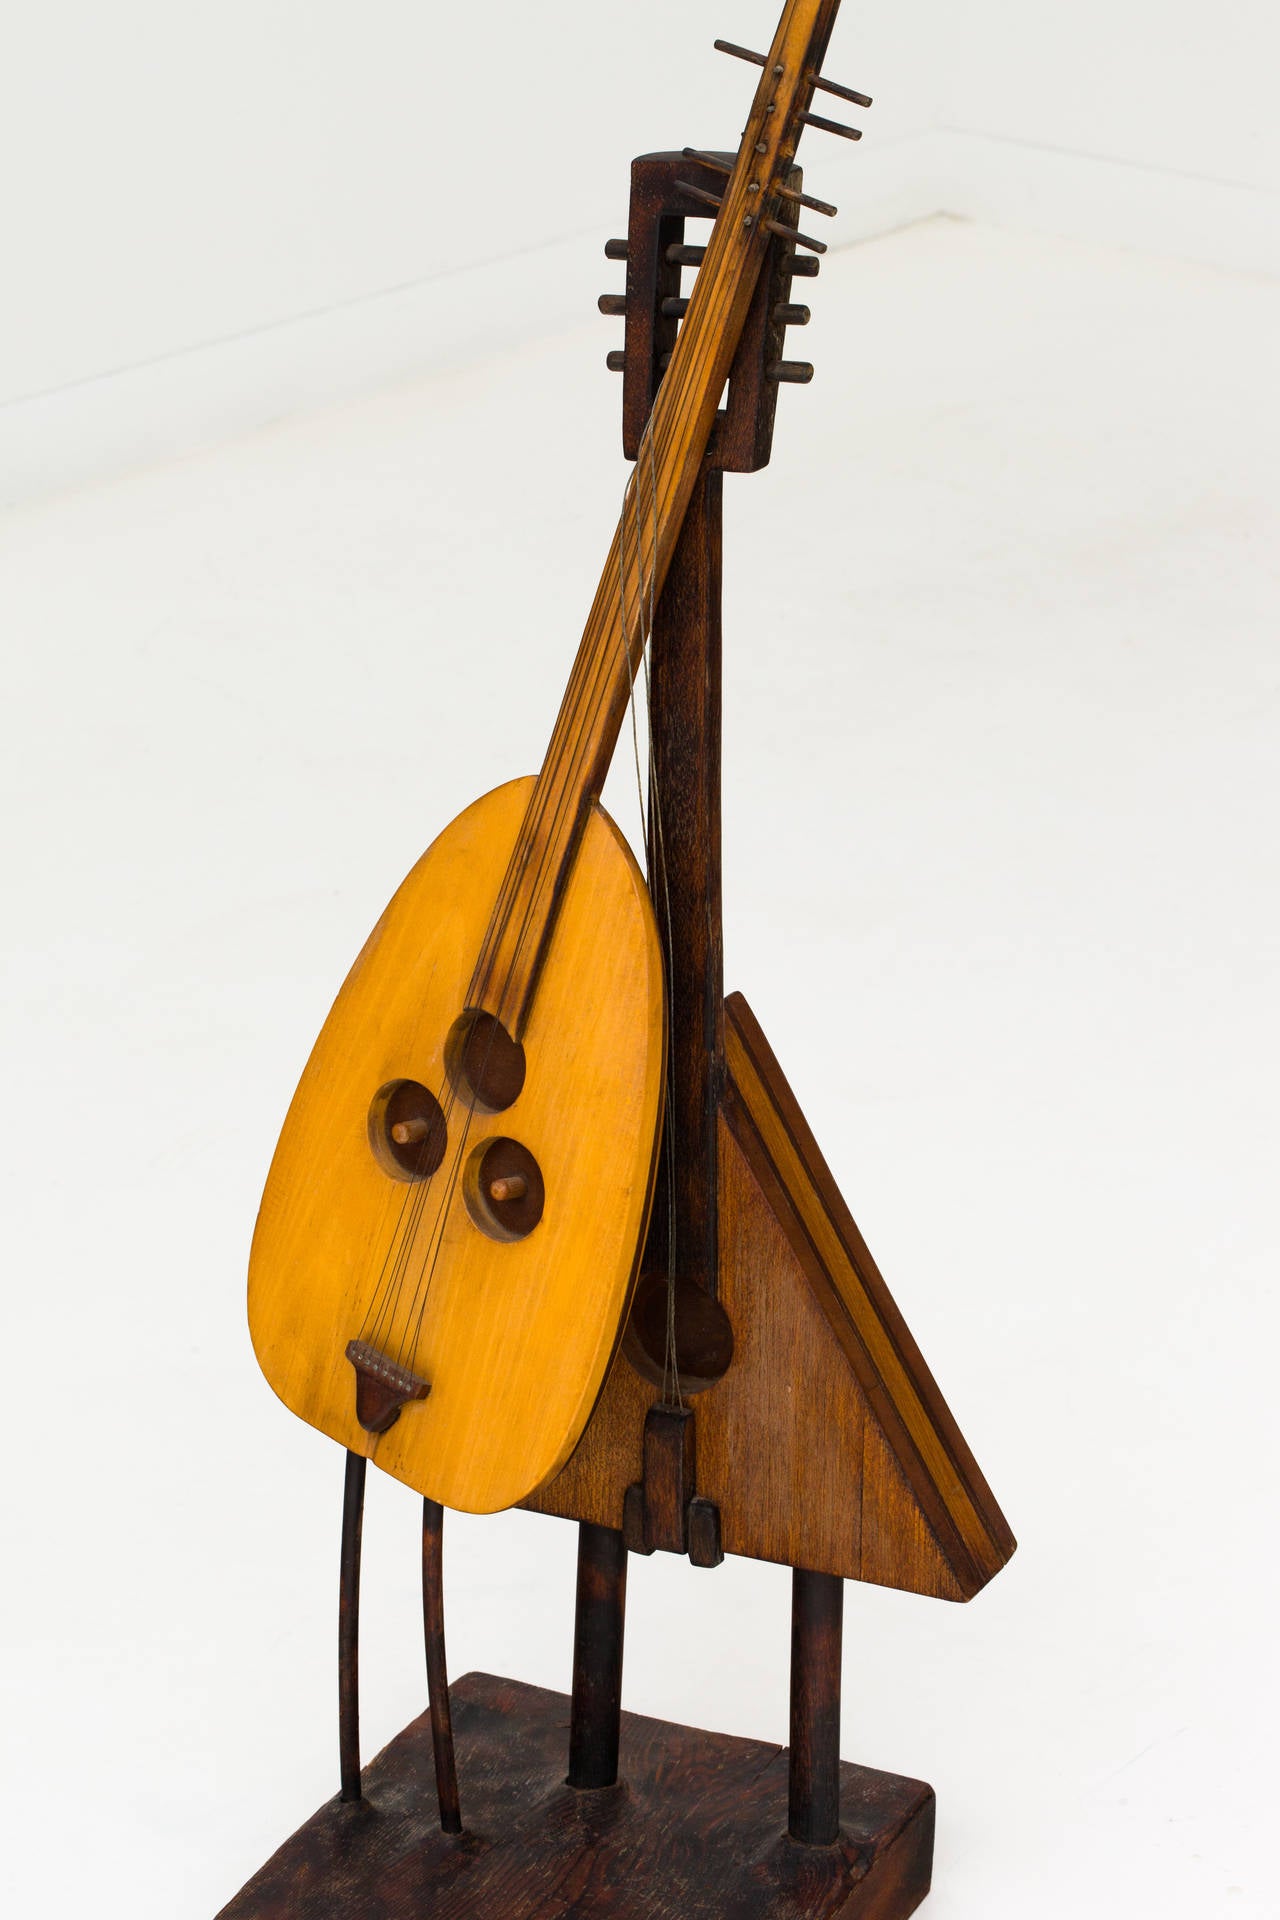 Whimsical Cubist inspired sculpture depicting anthropomorphic guitars dancing. Signed EW, 70.